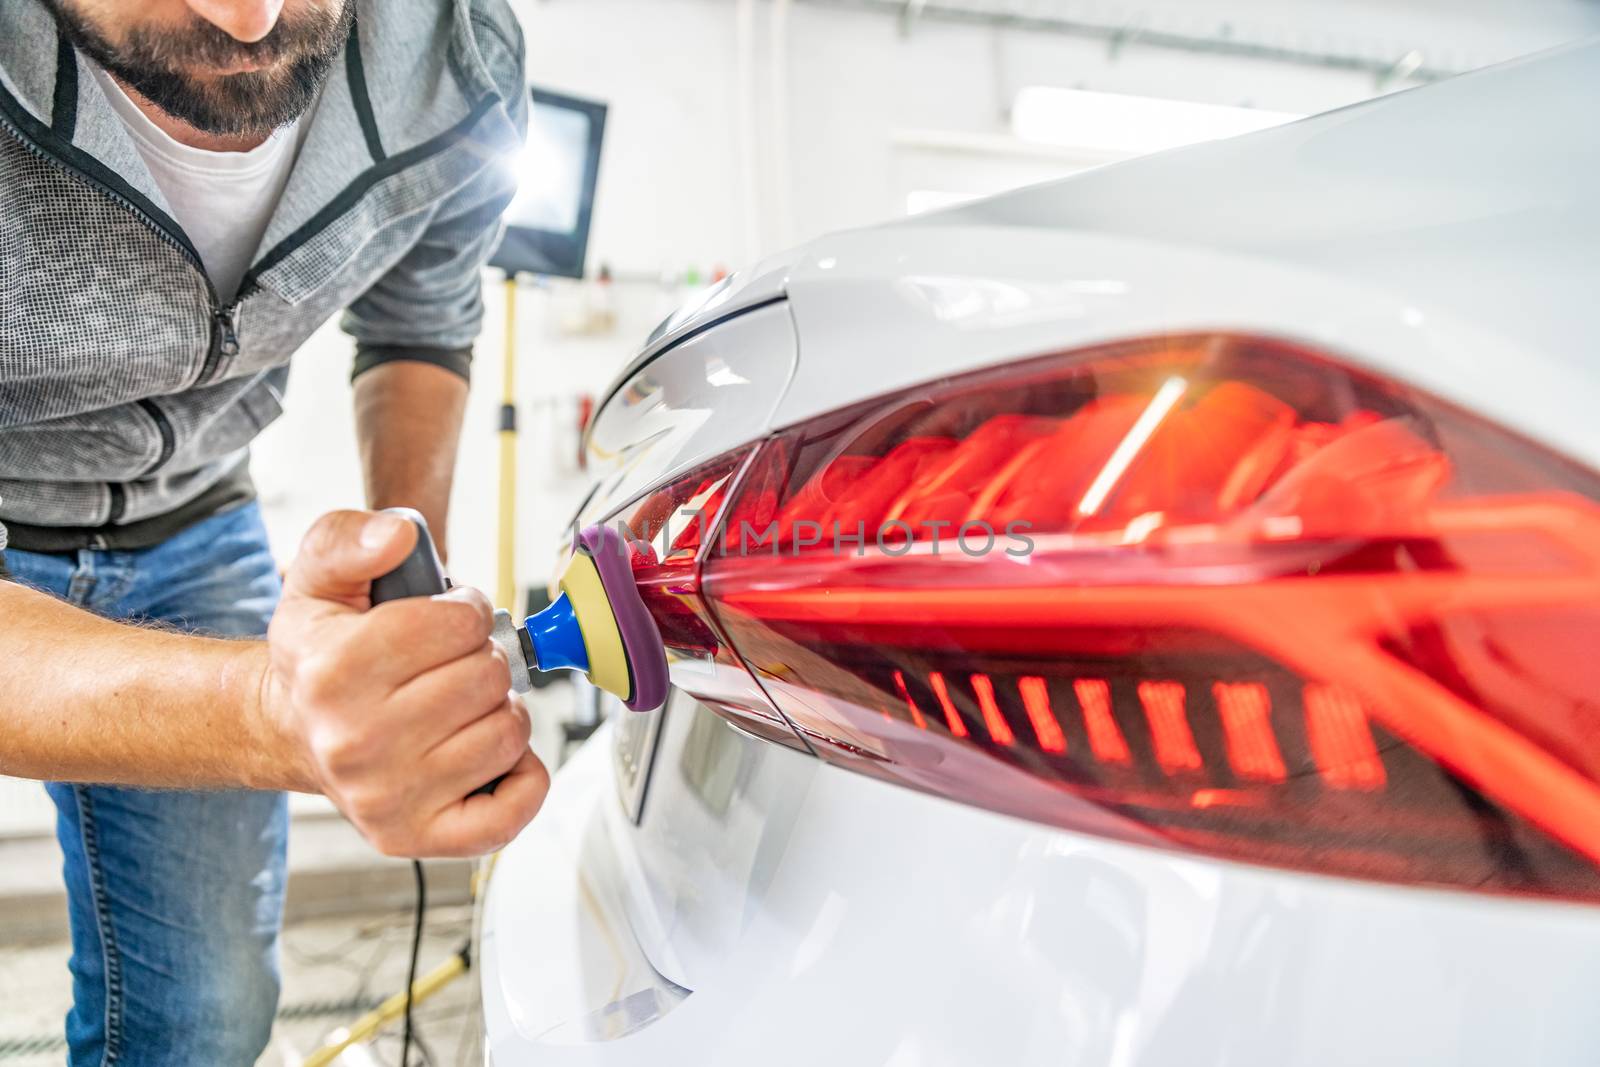 manual polishing of the headlight of luxury cars with the application of protective equipment by Edophoto